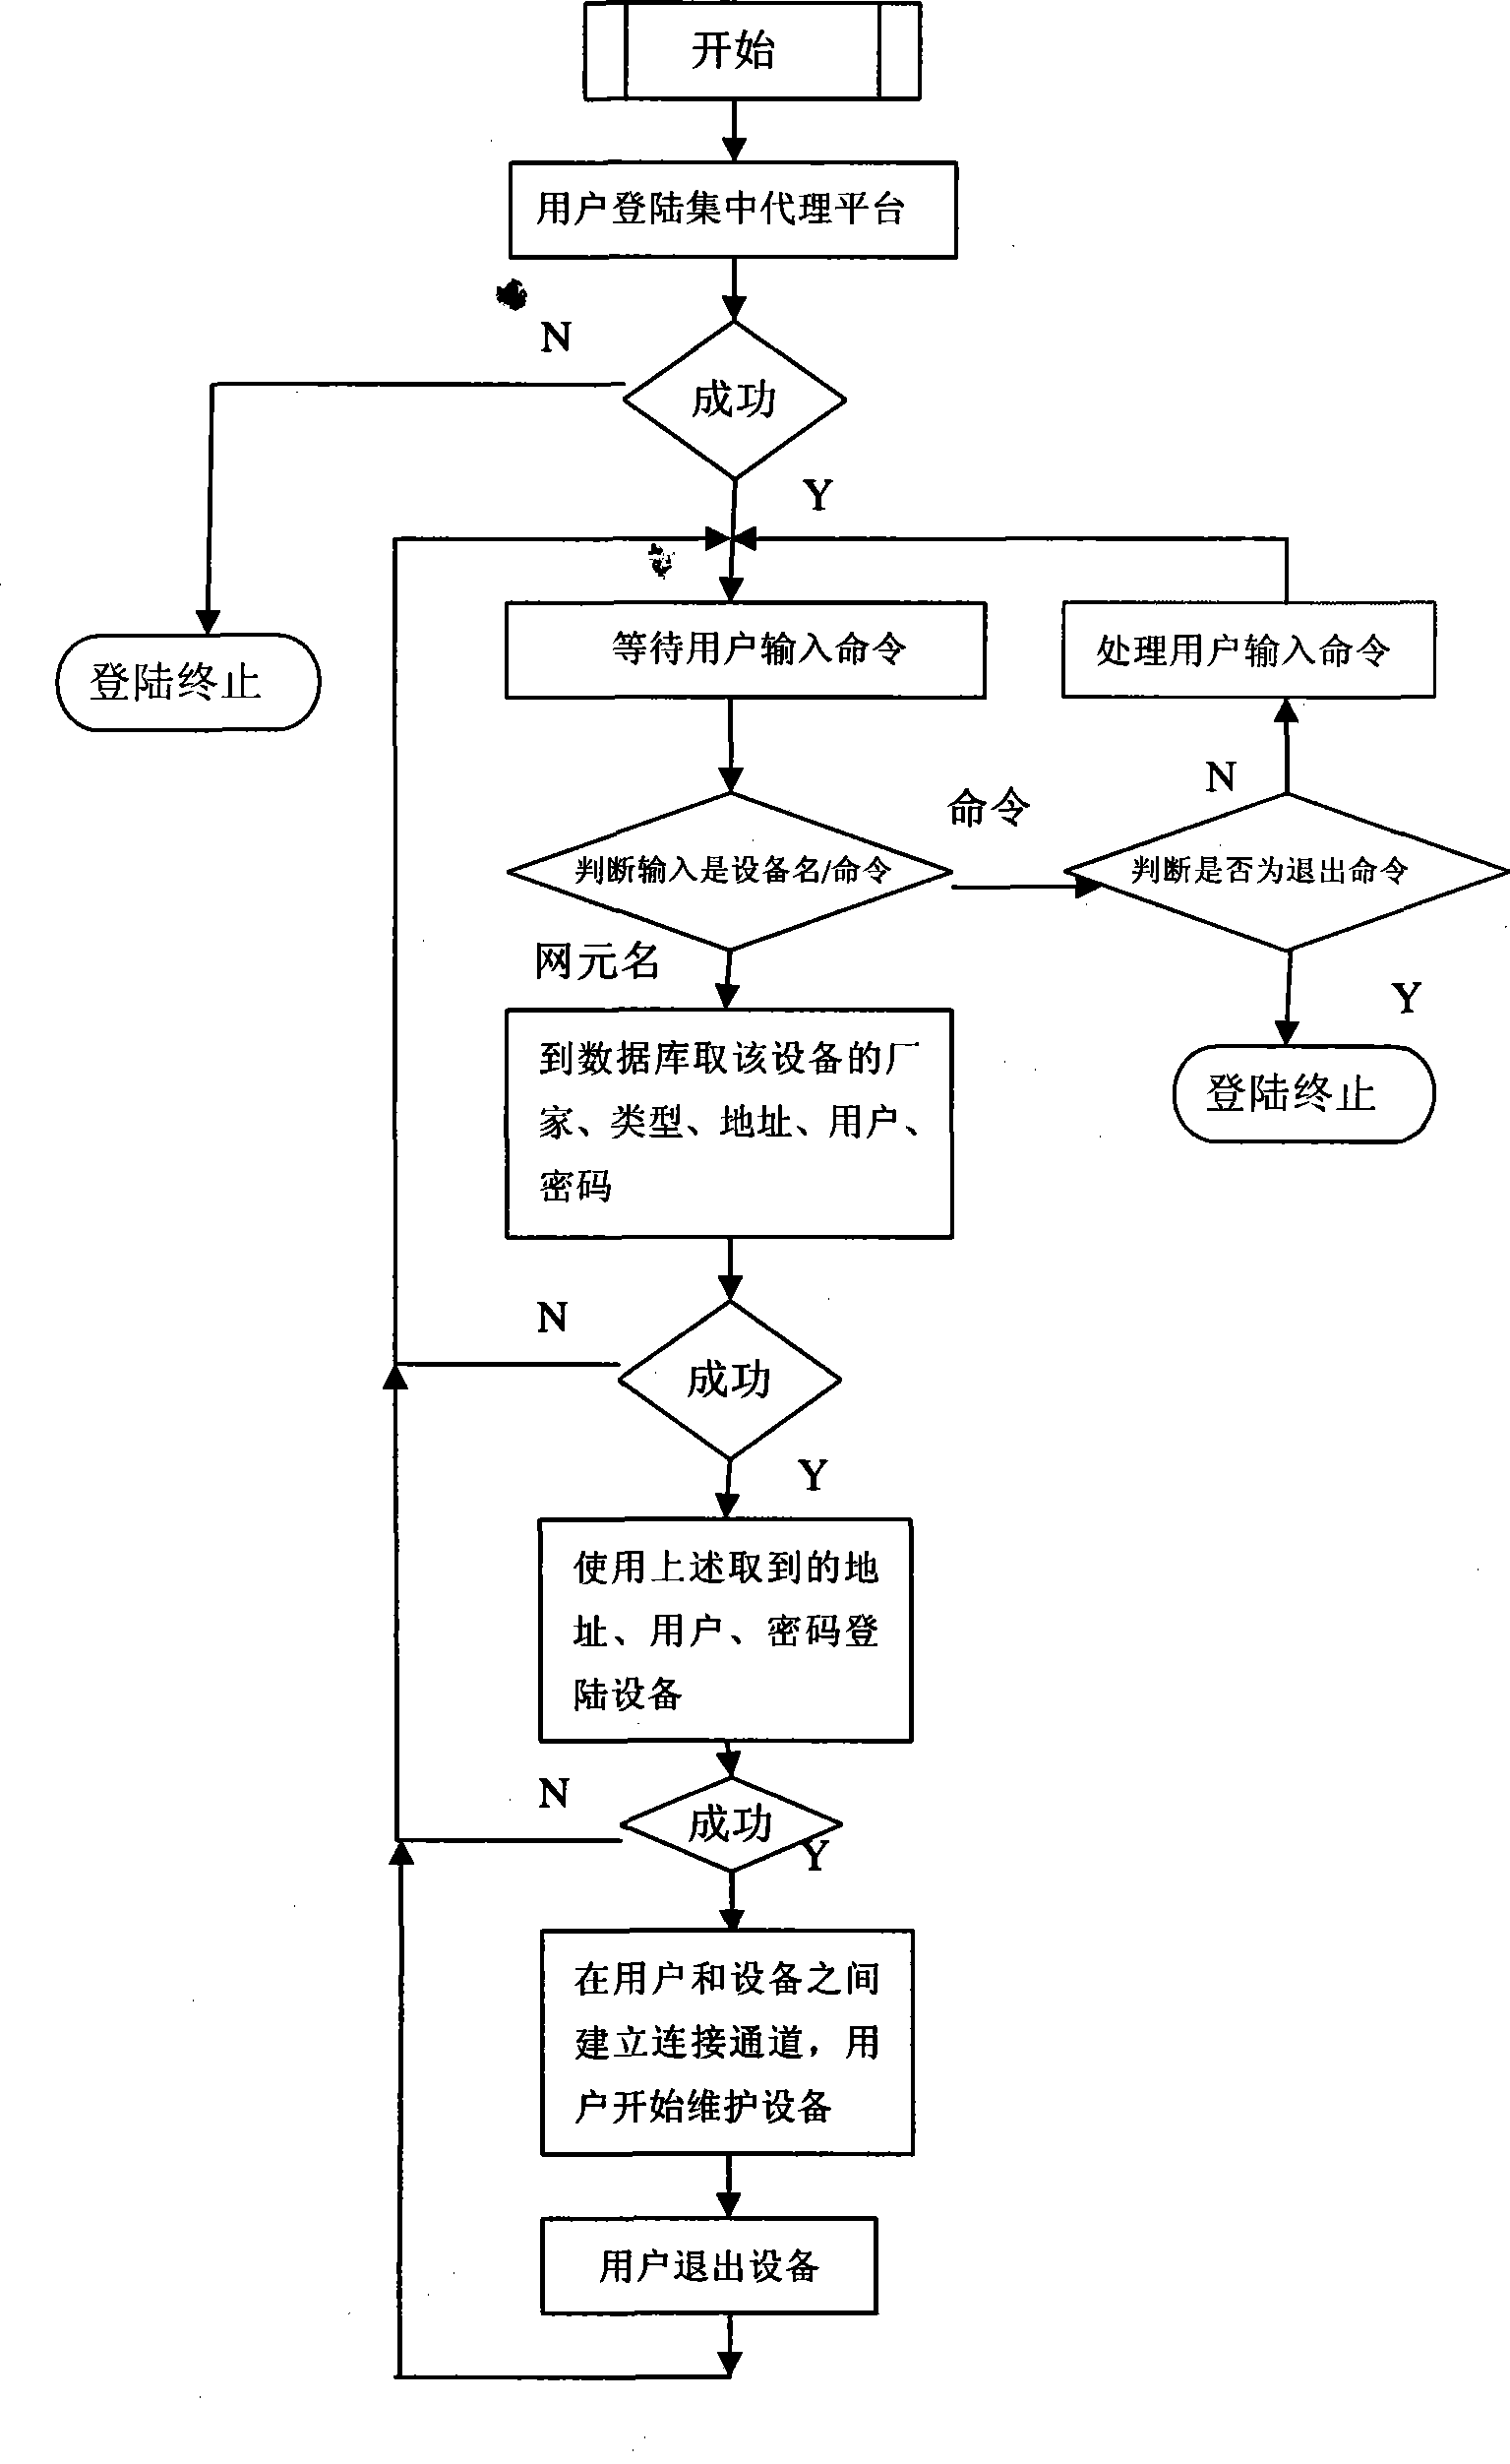 System for telecommunication equipment centralized login and implementing method thereof